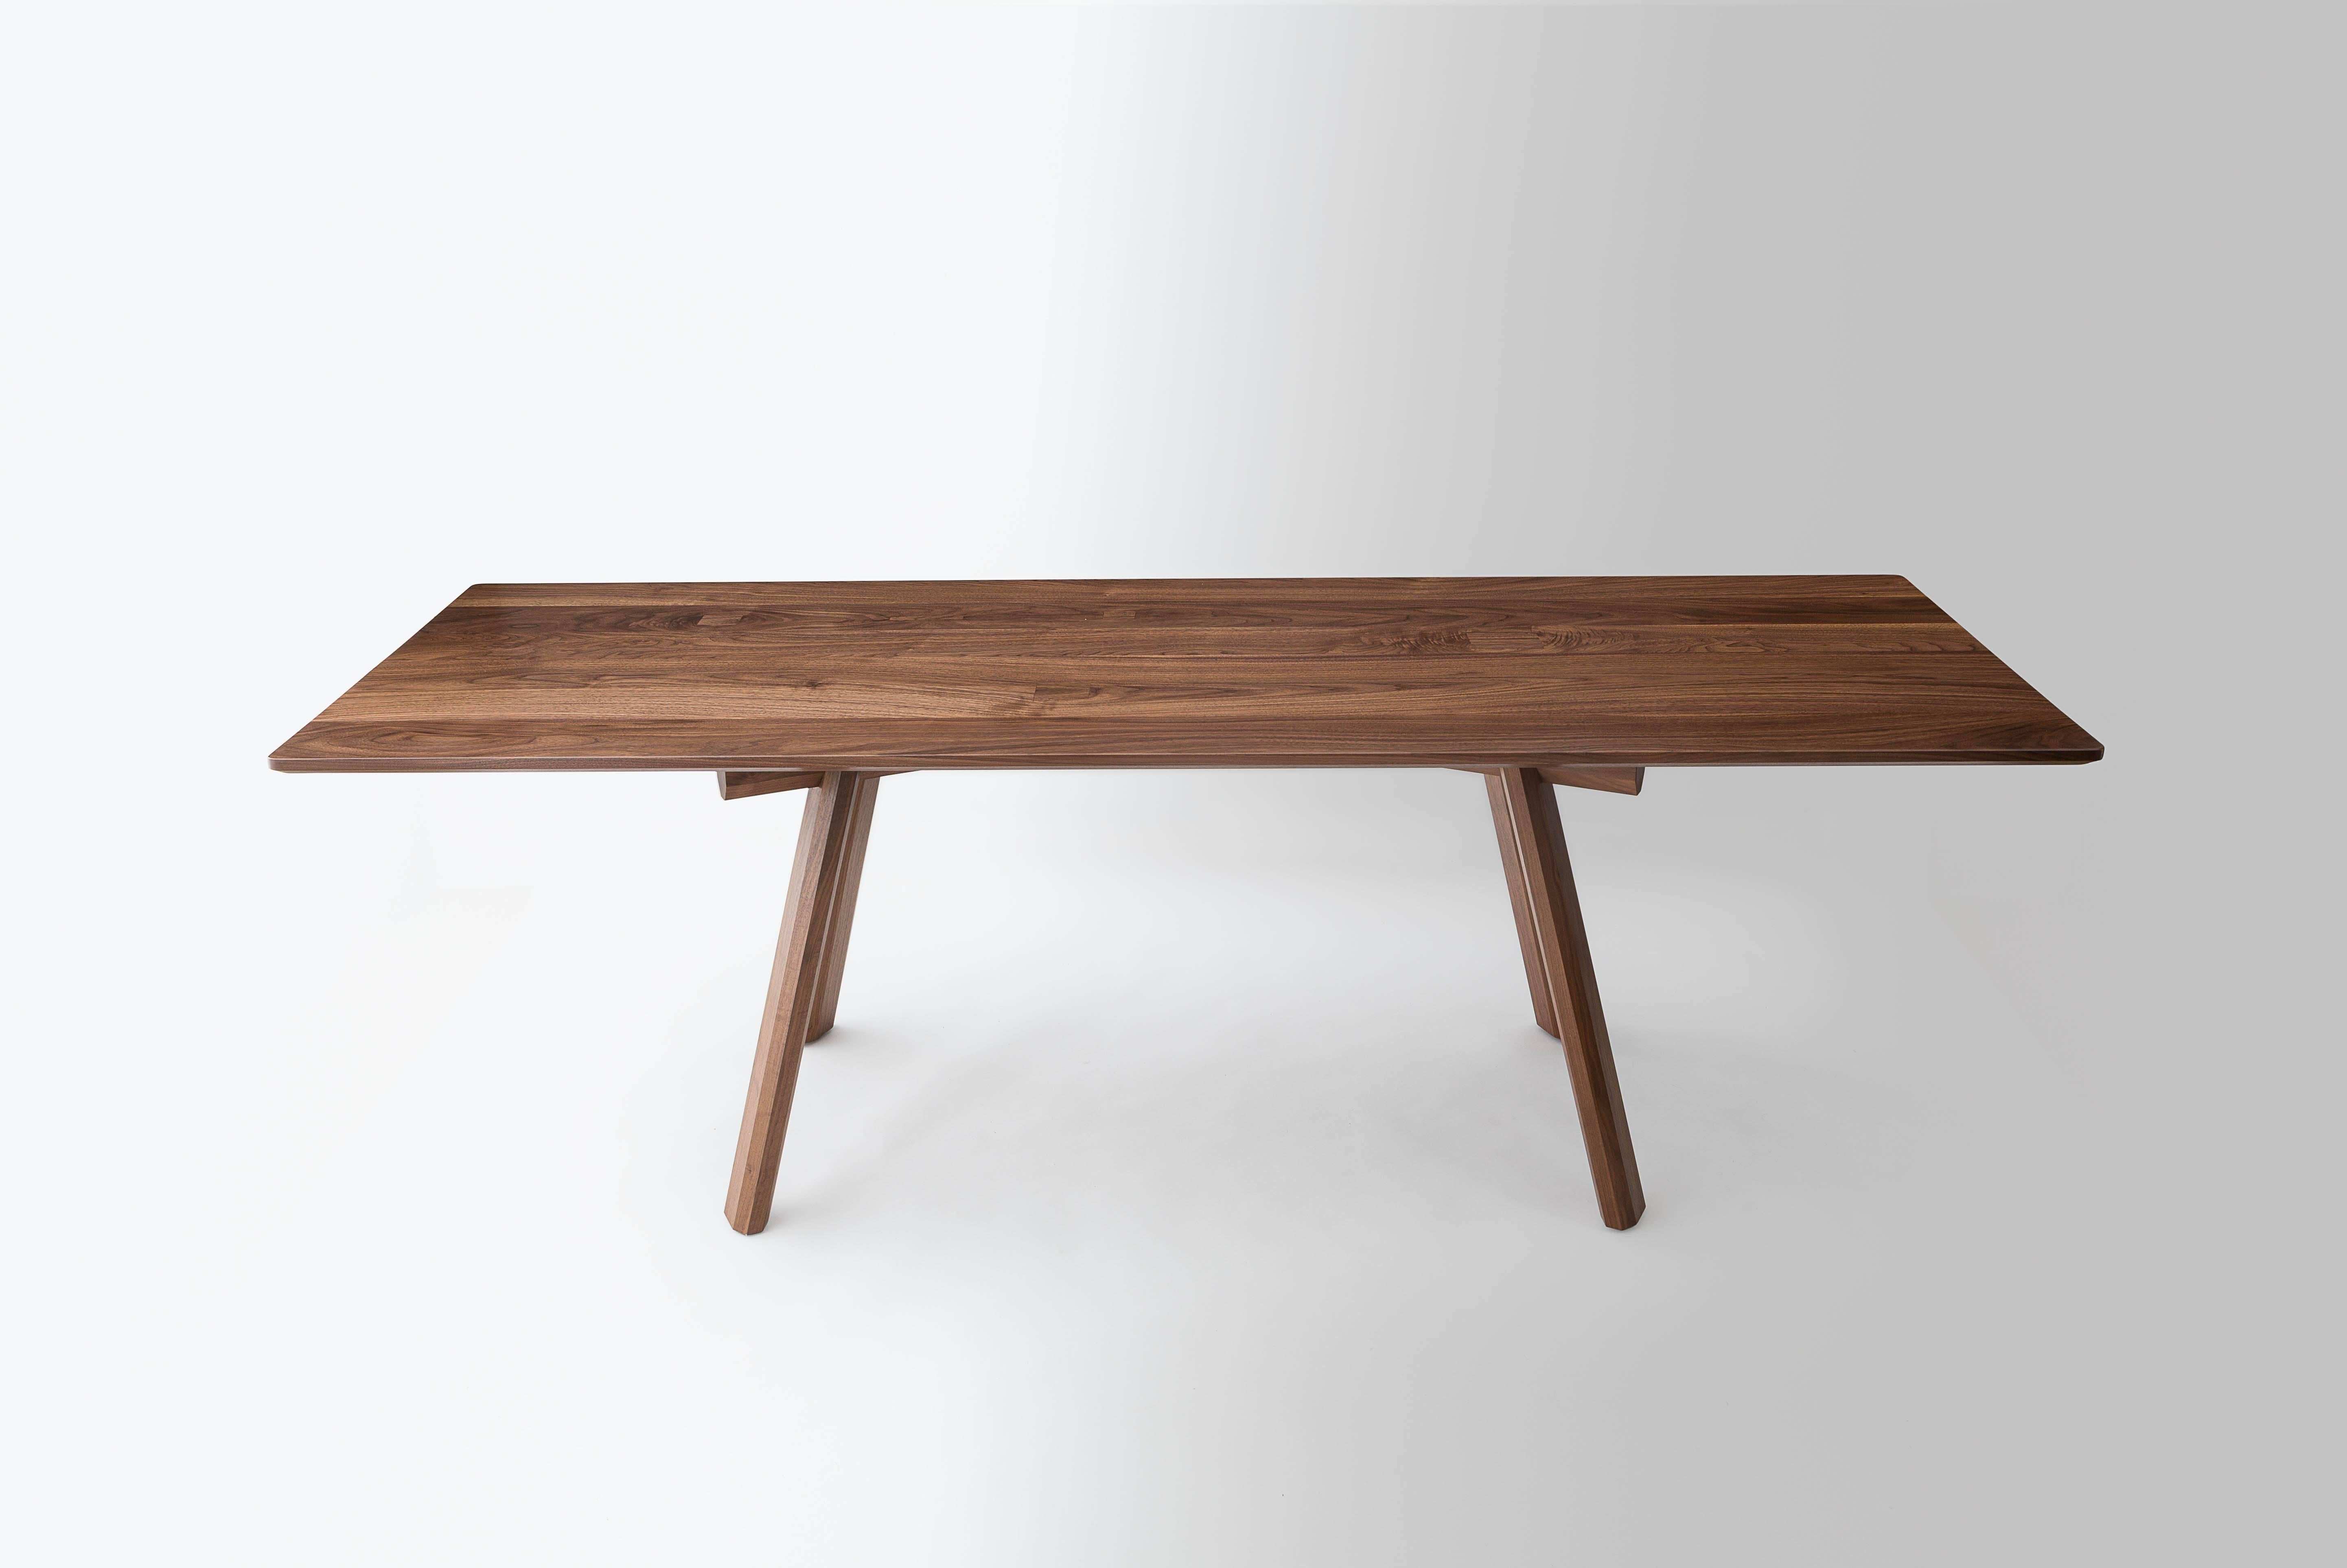 The Ripley dining table is built by hand on our Brooklyn Studio using premium hardwoods. The base is constructed with traditional joinery. The faceted legs help to showcase the exaggerated lap joints that give the table its robust feel and